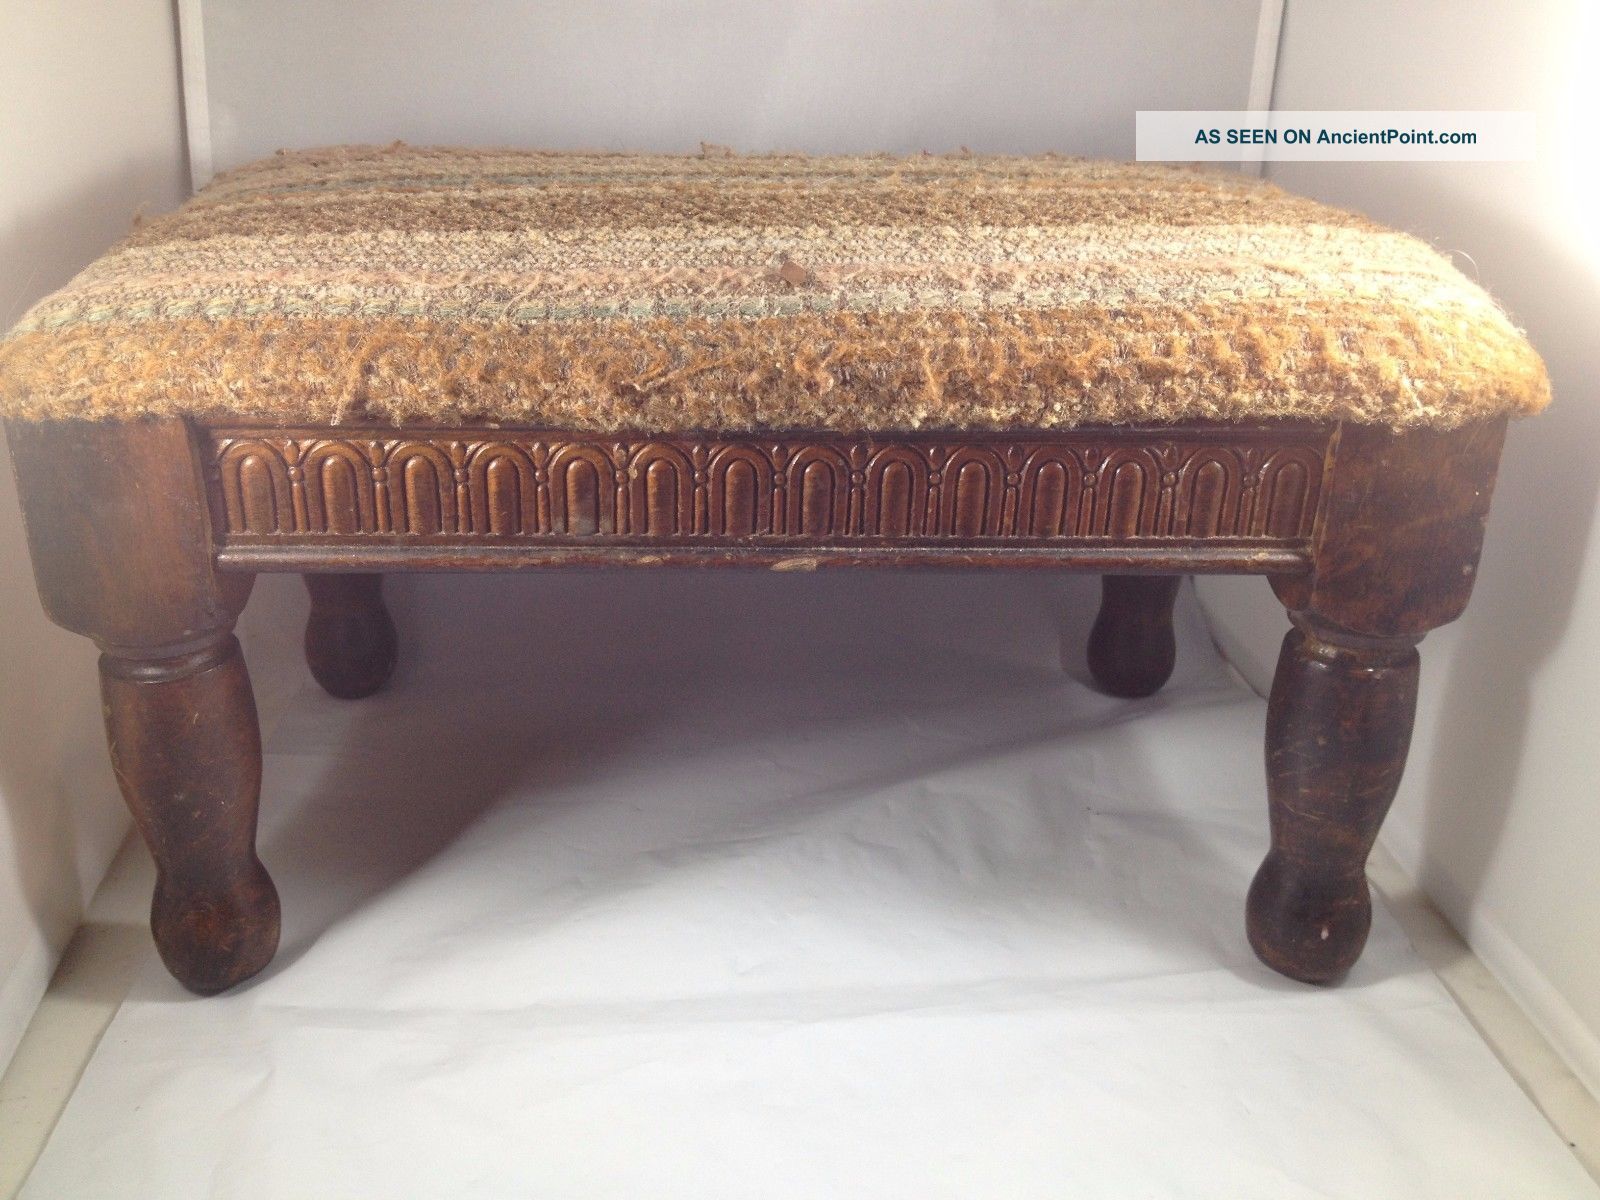 Antique Foot Stool Pressed Apron Small Wood Fabric Cover Top Sturdy 1800-1899 photo